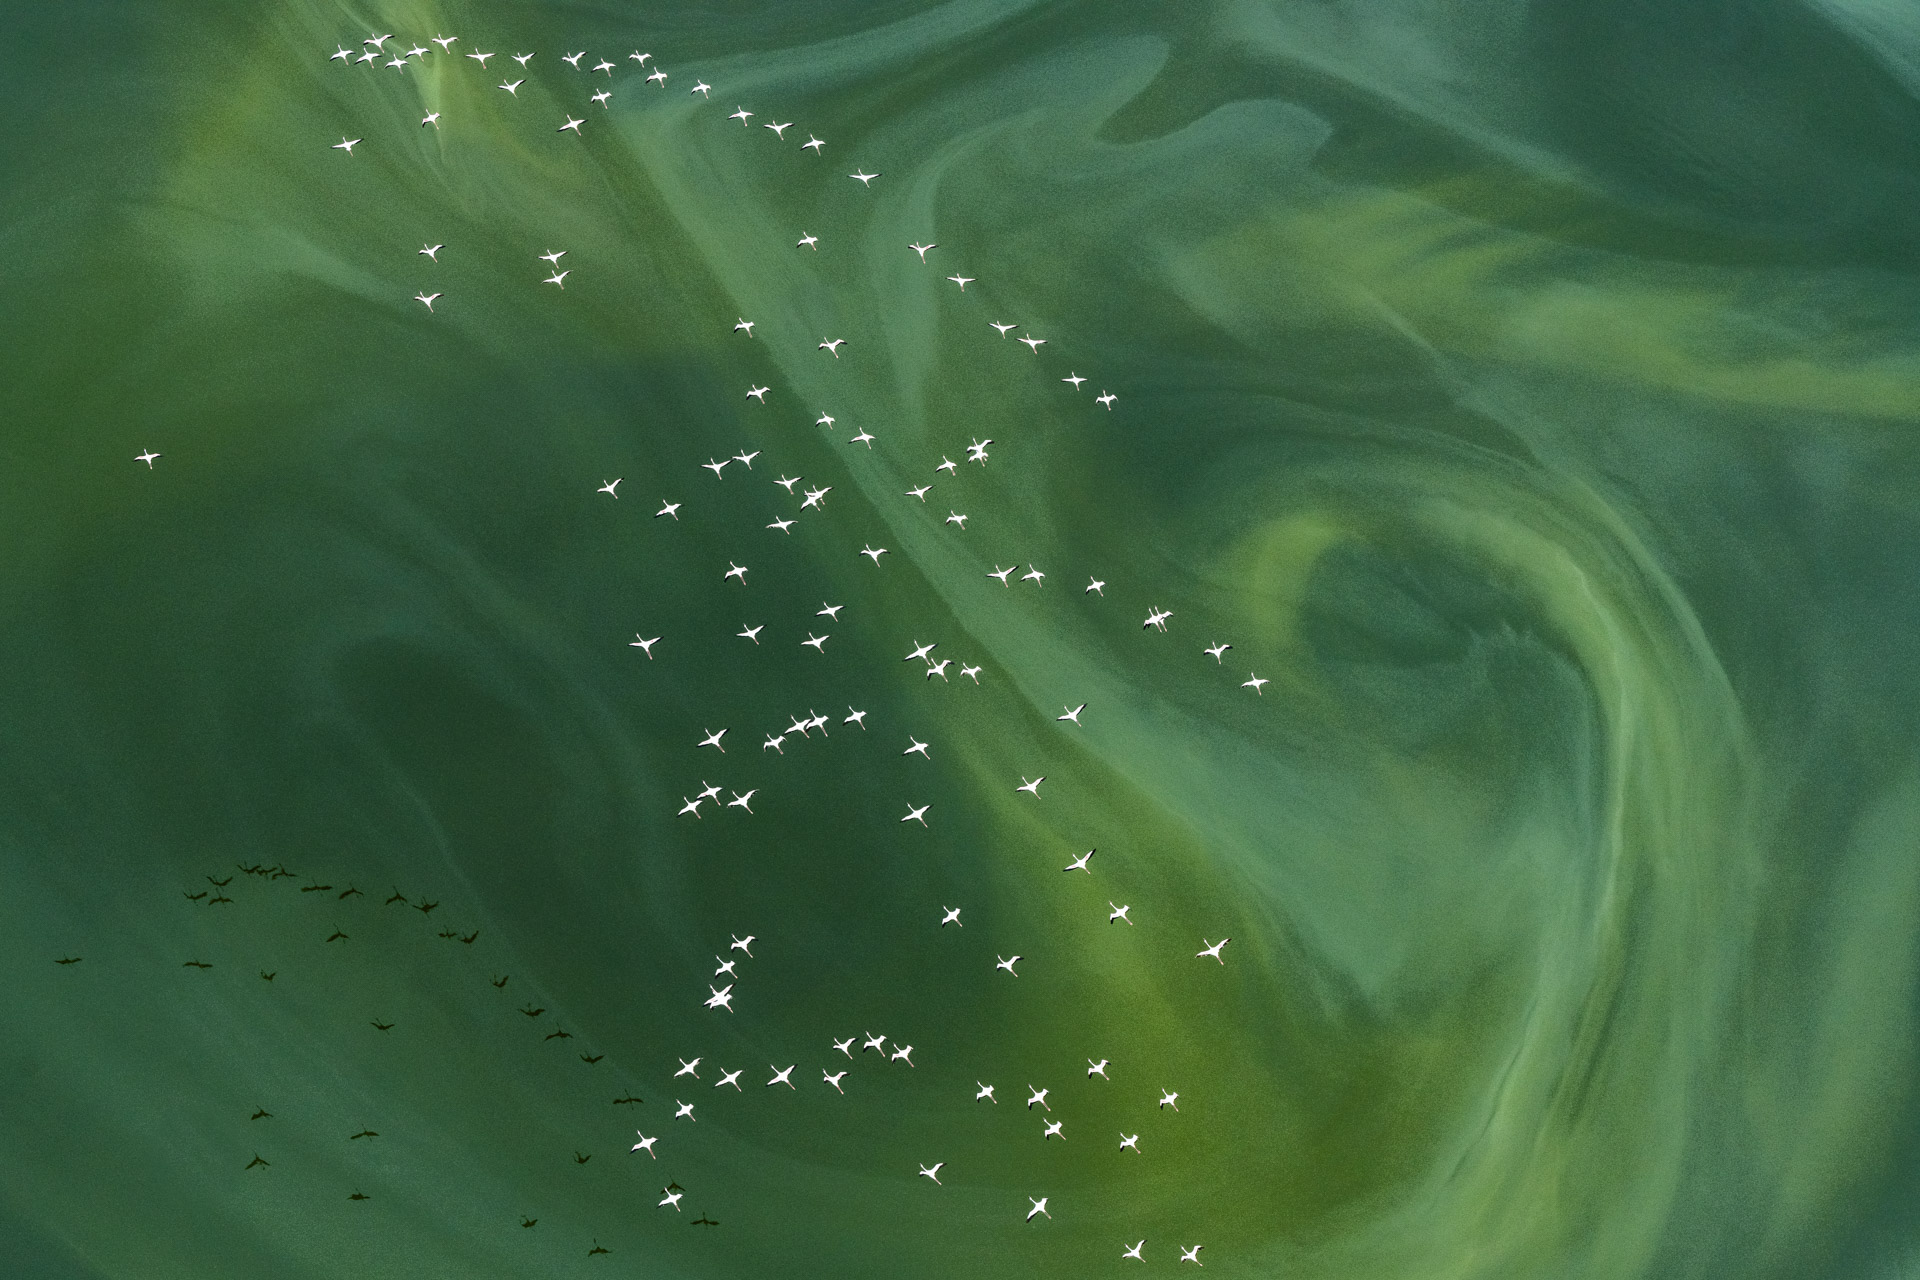 small birds fly above a swirling green expanse